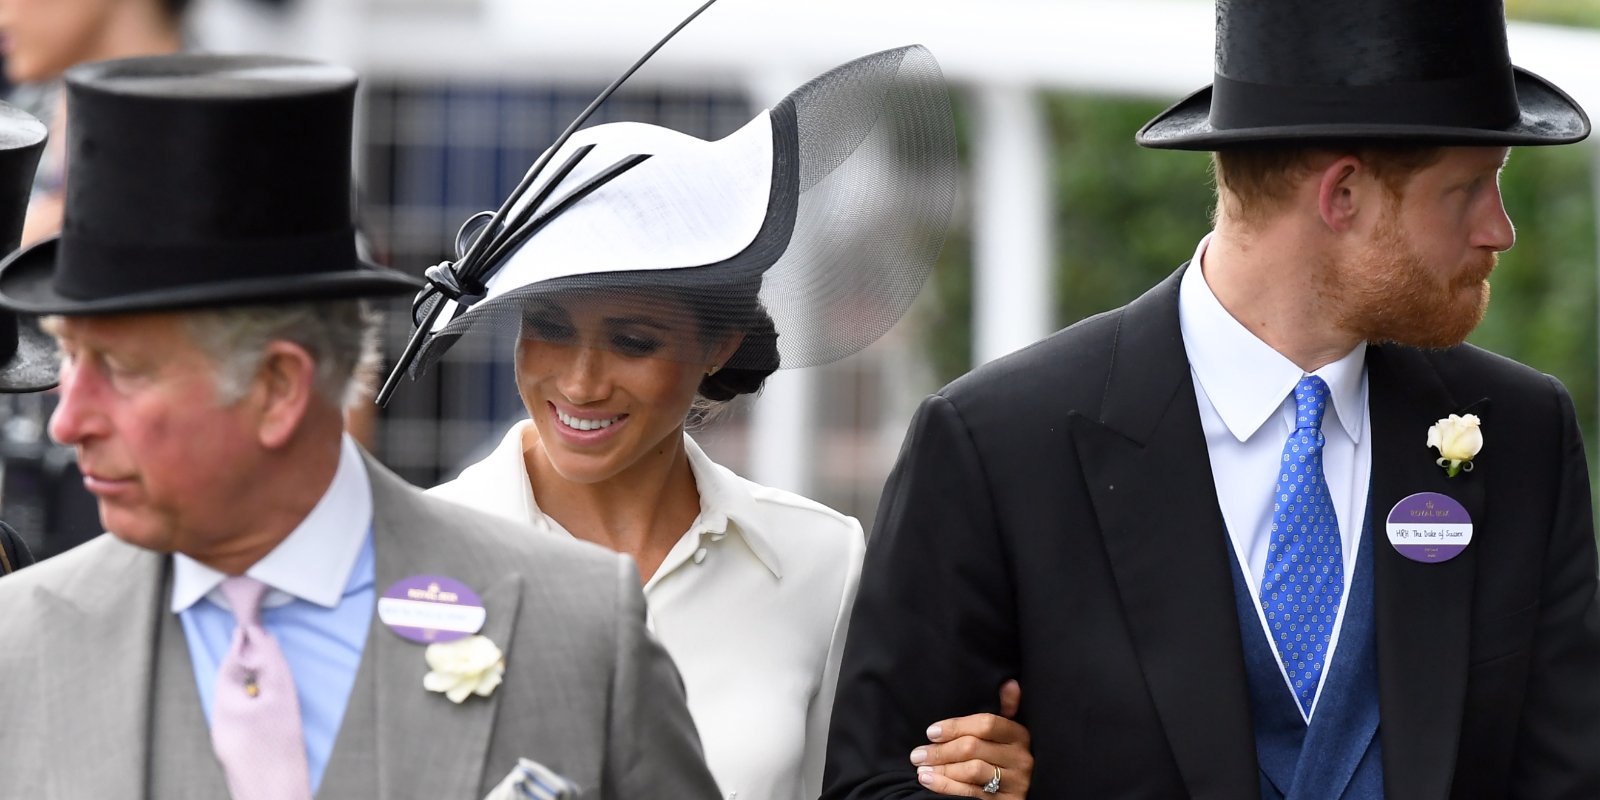 King Charles III, Meghan Markle and Prince Harry at Ascot in 2018.